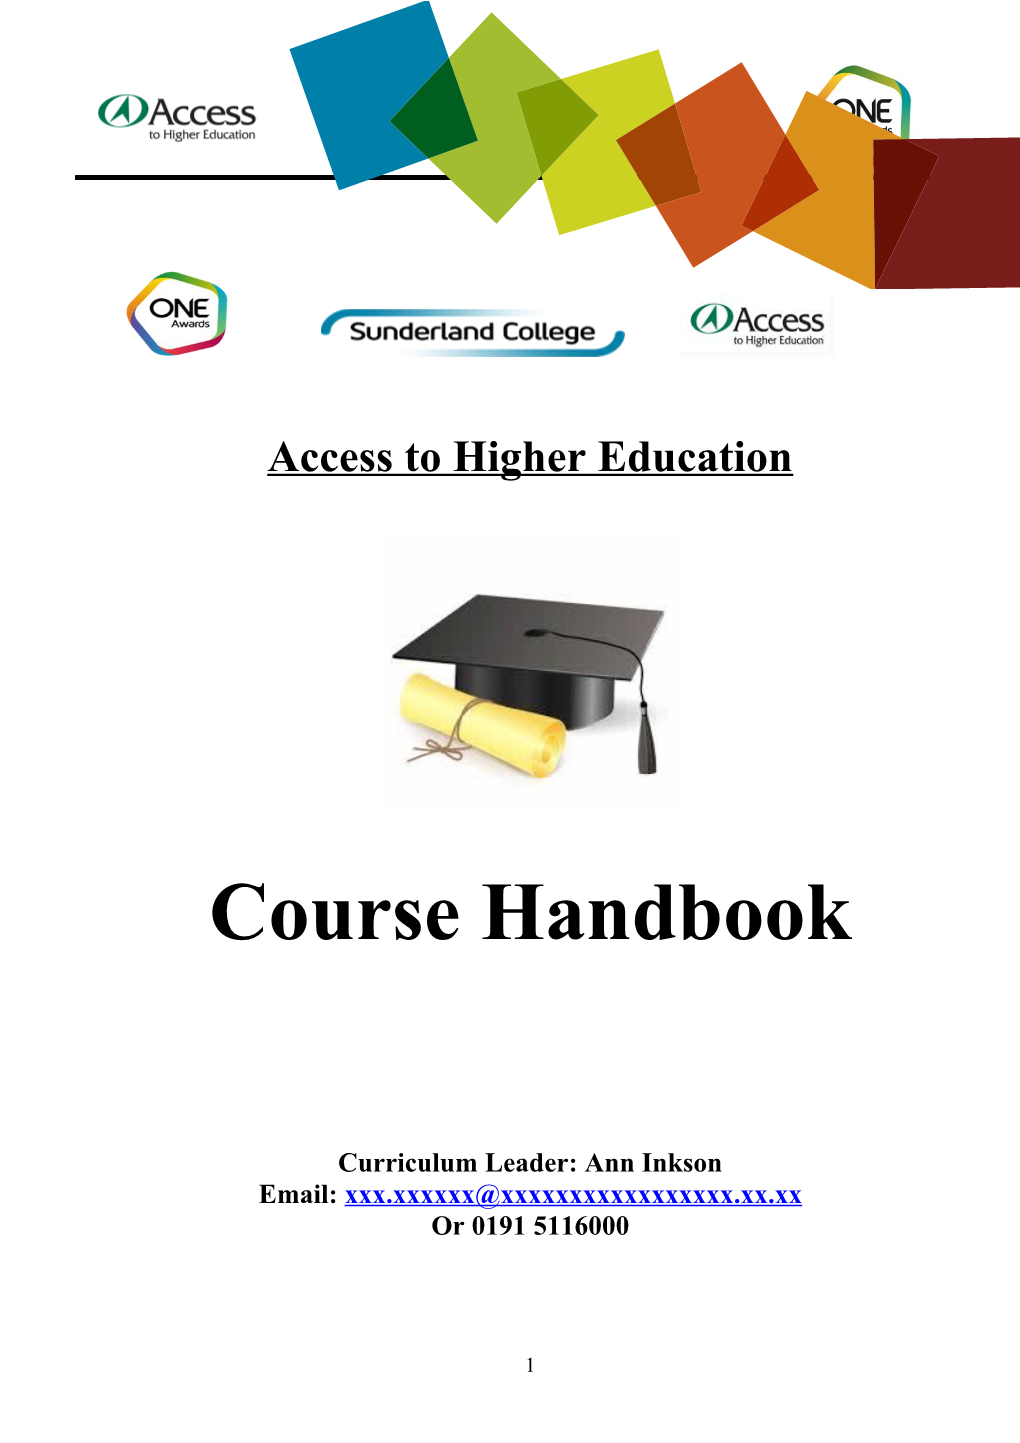 Access to Higher Education